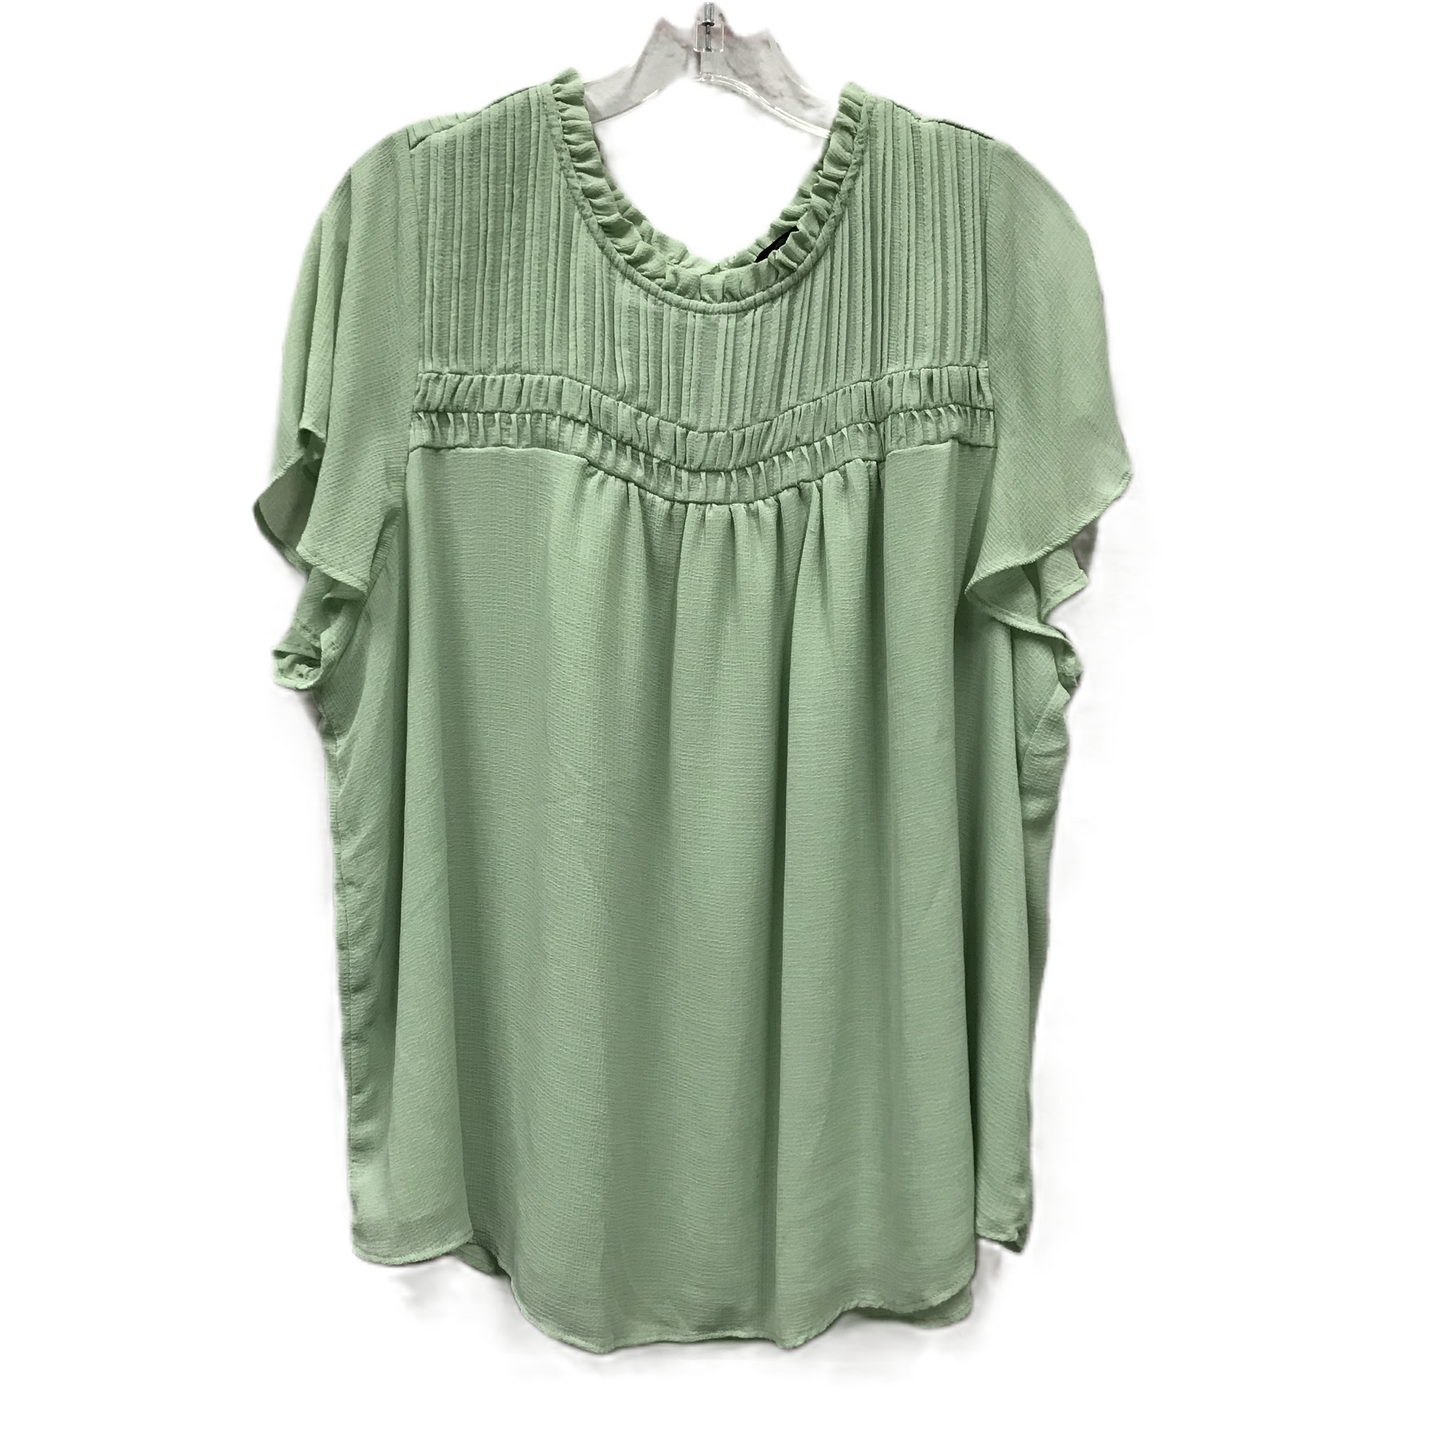 Green Top Short Sleeve By Torrid, Size: 3x